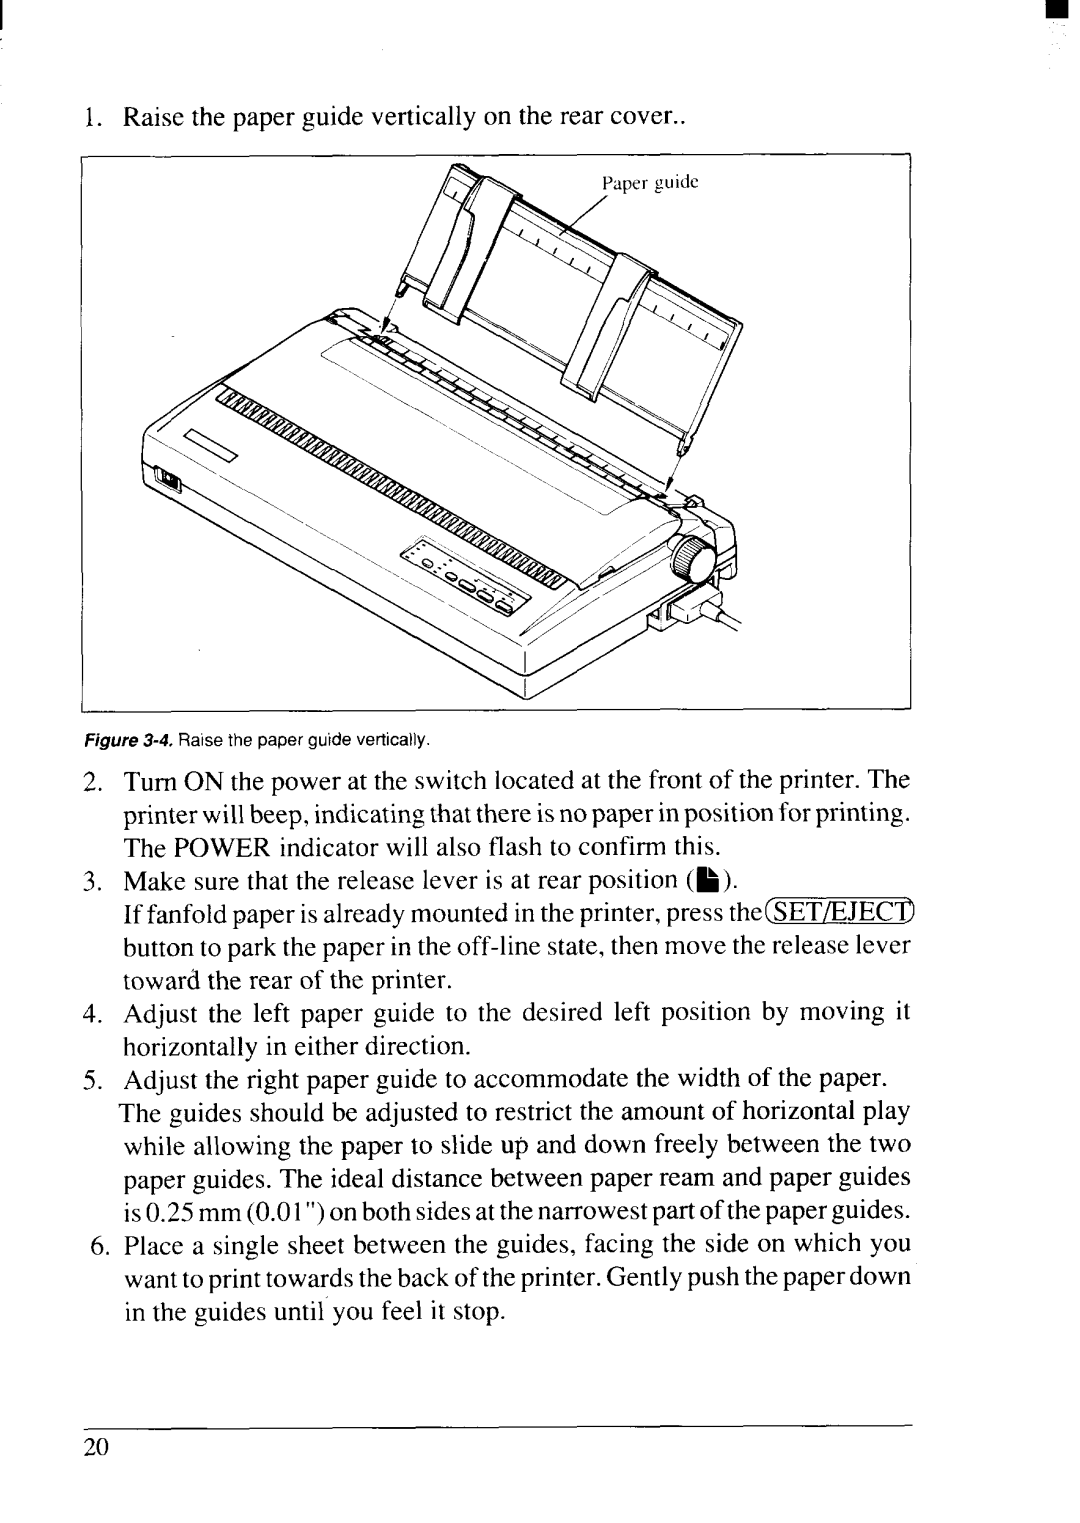 Star Micronics NX-2415II user manual Raise the paper guide vertically on the rear cover 